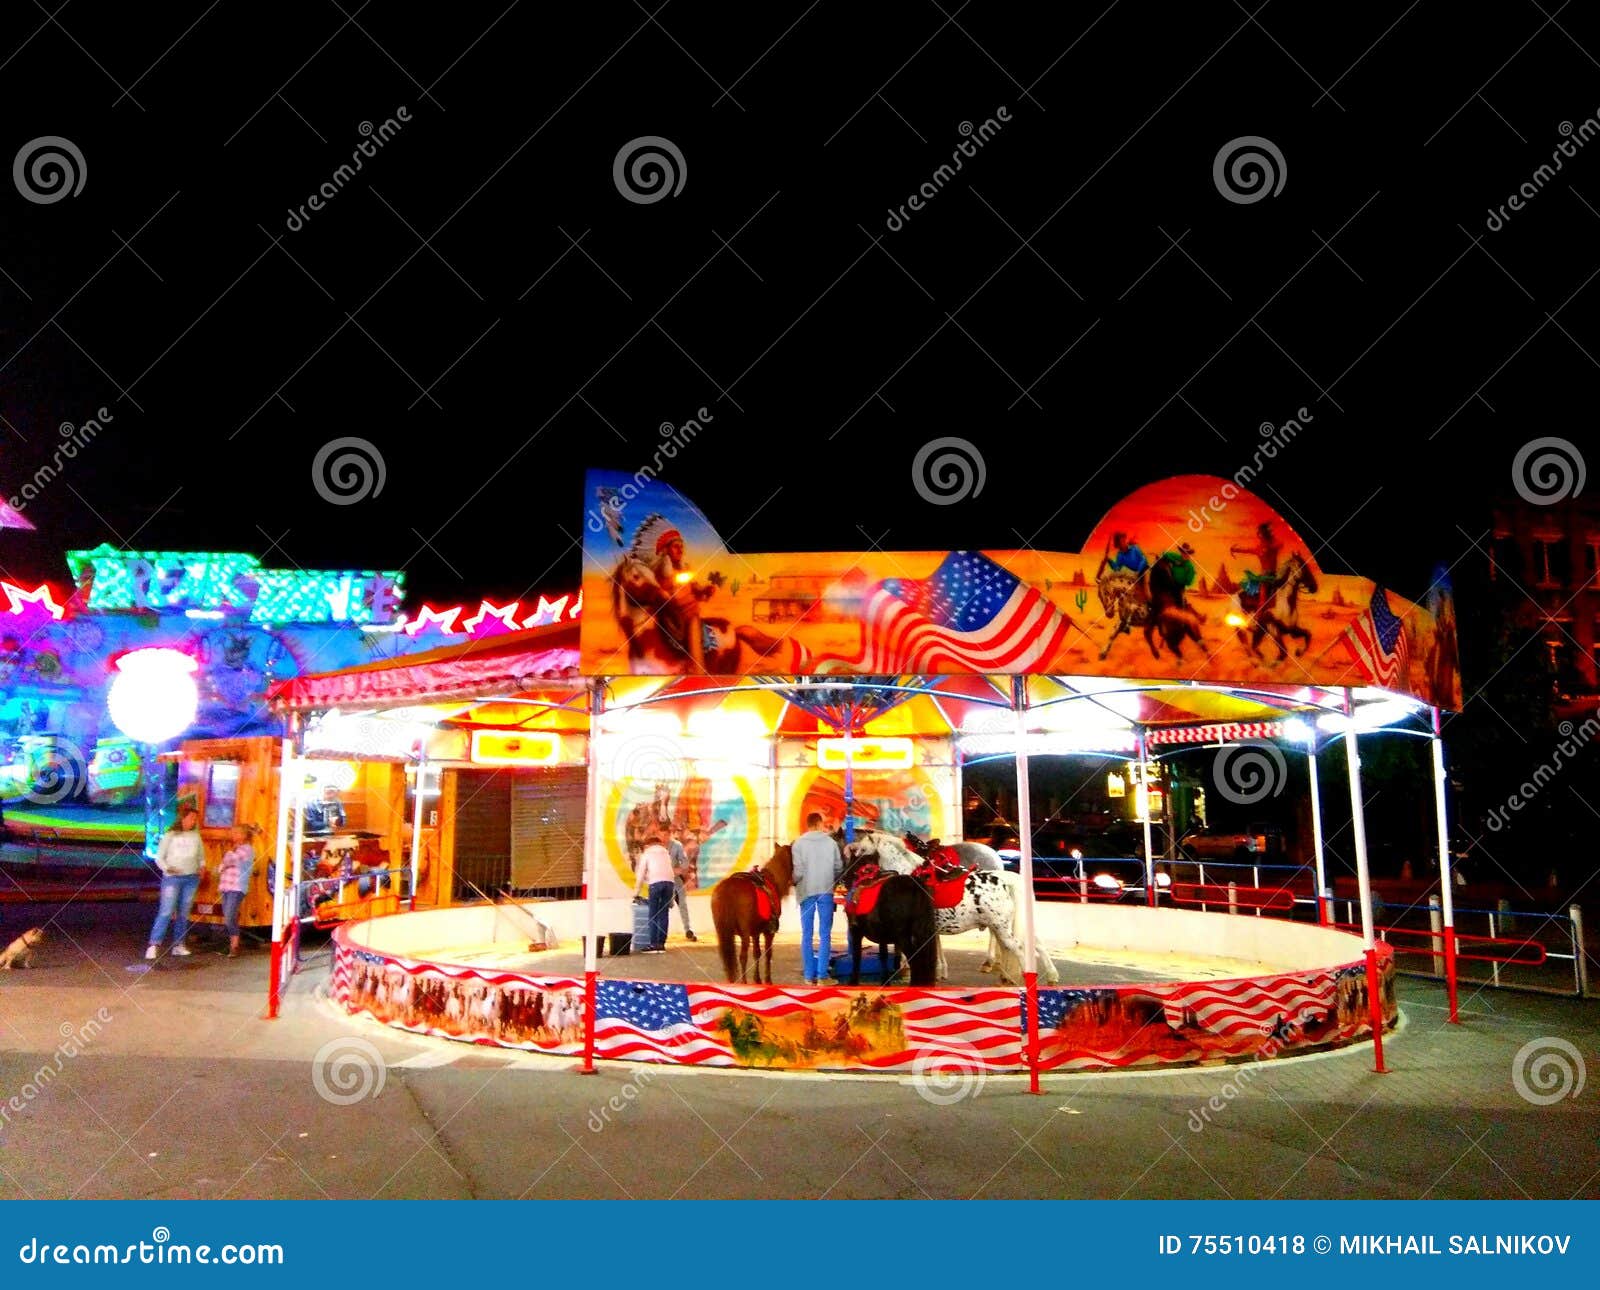 Night City Lights Attractions Editorial Stock Photo of attraction, belgium: 75510418